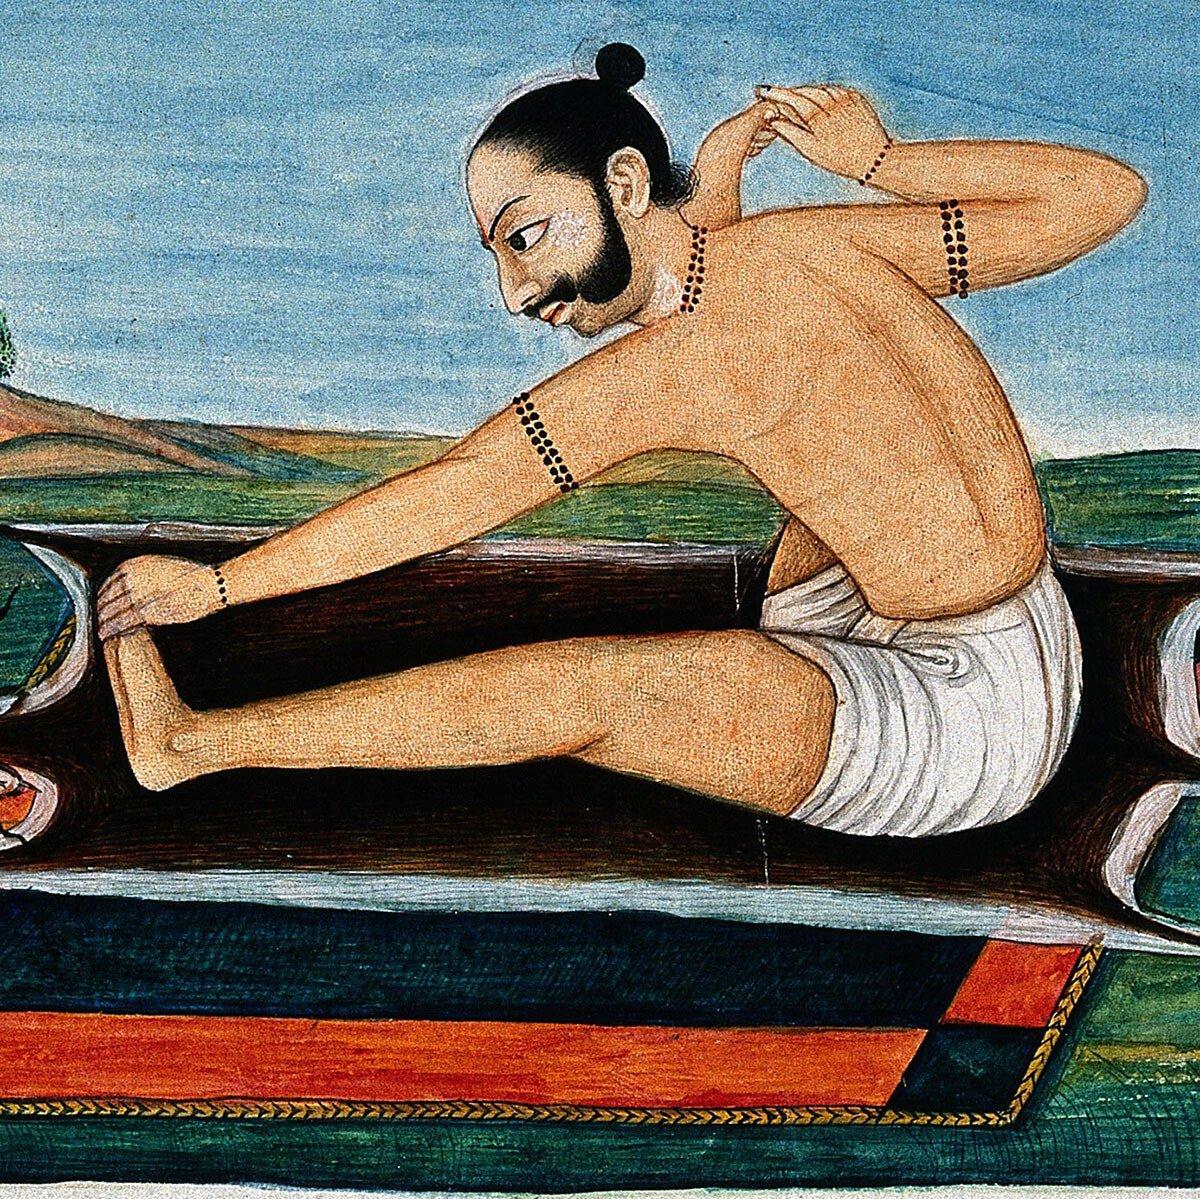 19th-century gouache painting of a man in a yoga posture